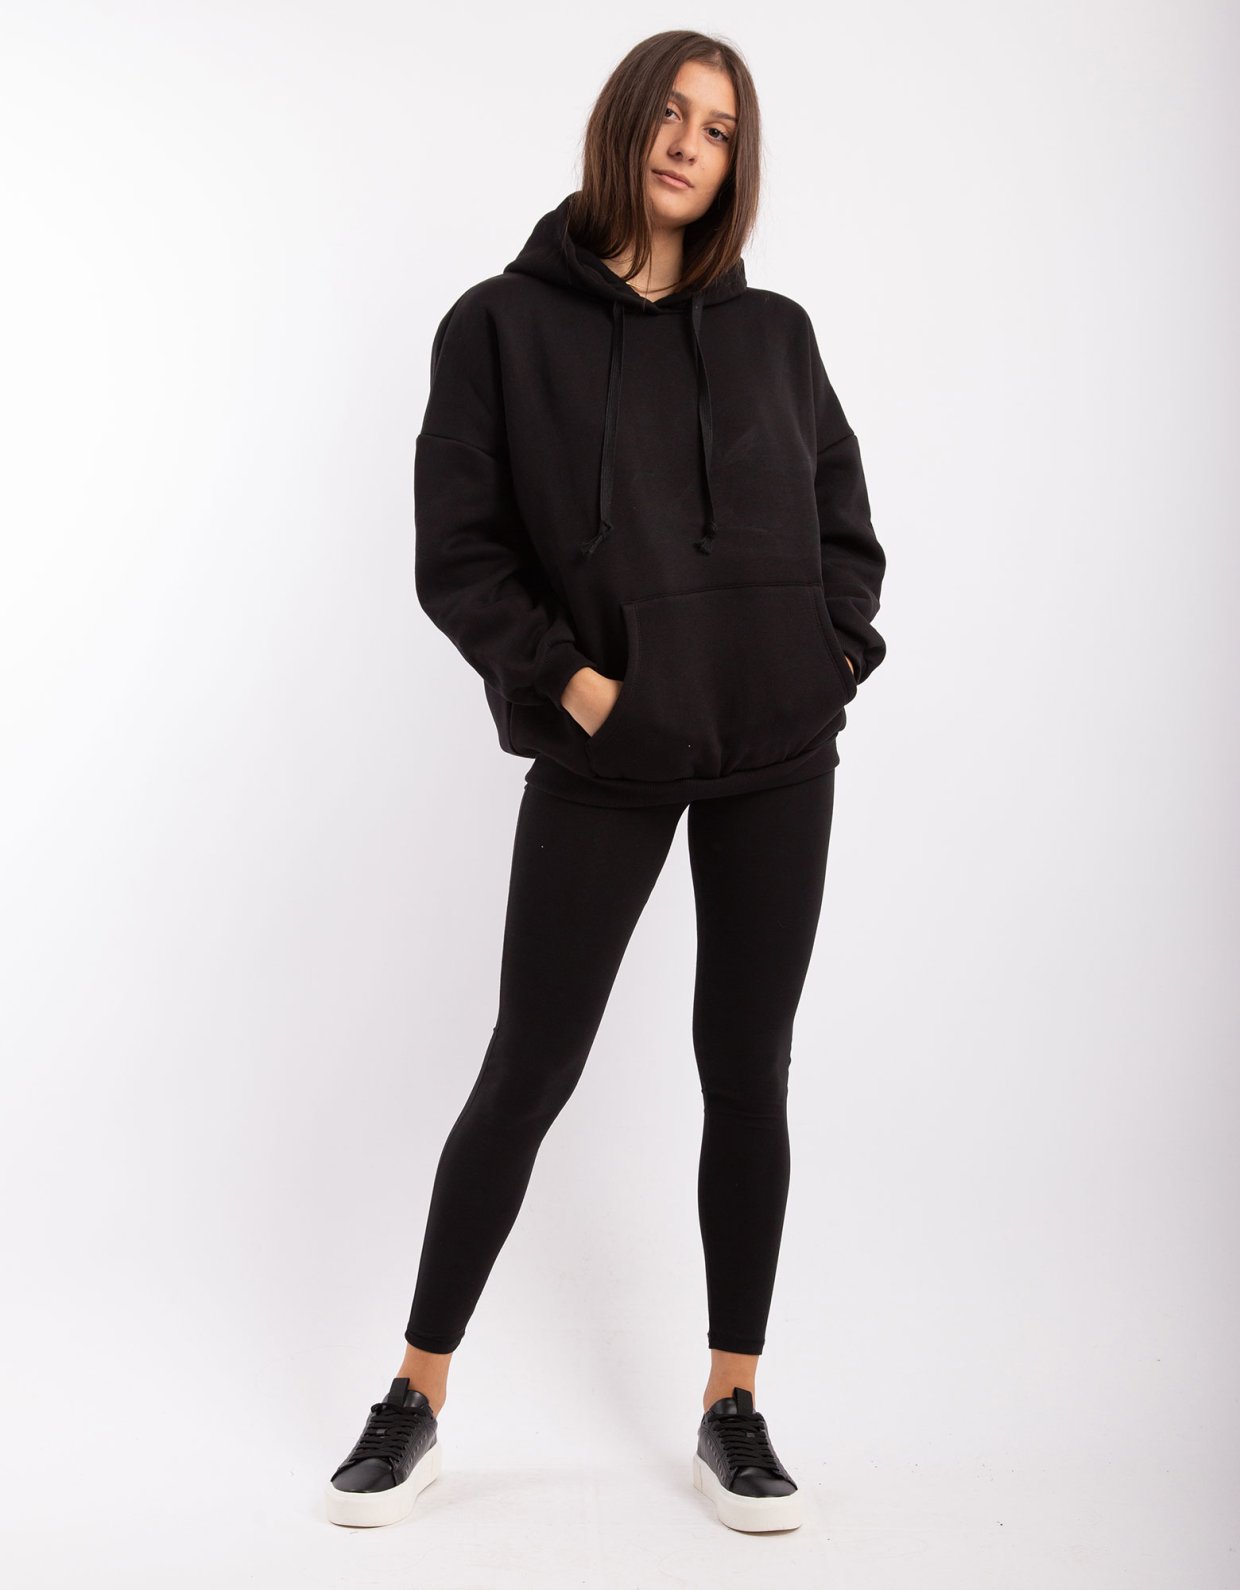 Kendall + Kylie Active oversized hoody tiger black